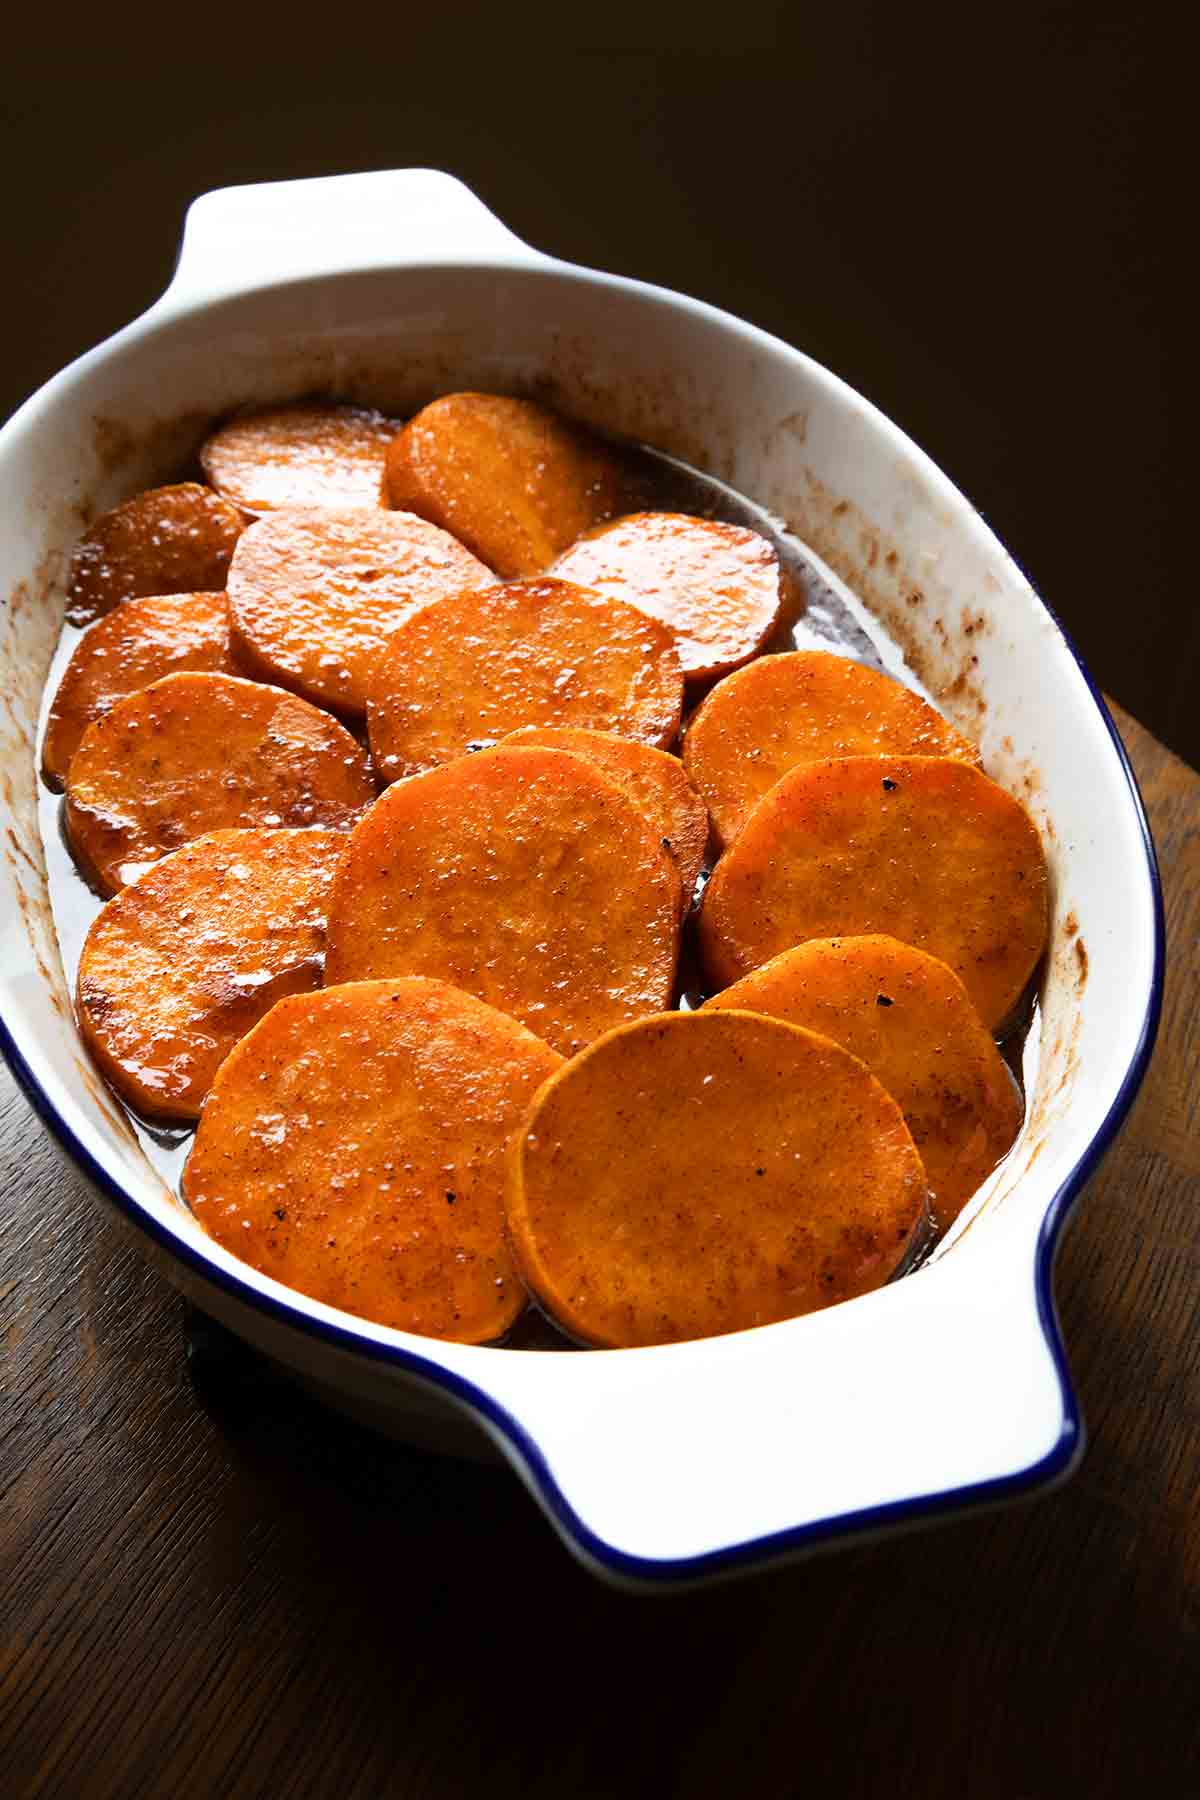 An oval baking dish filled with slices of candied sweet potatoes in a brown sugar syrup.